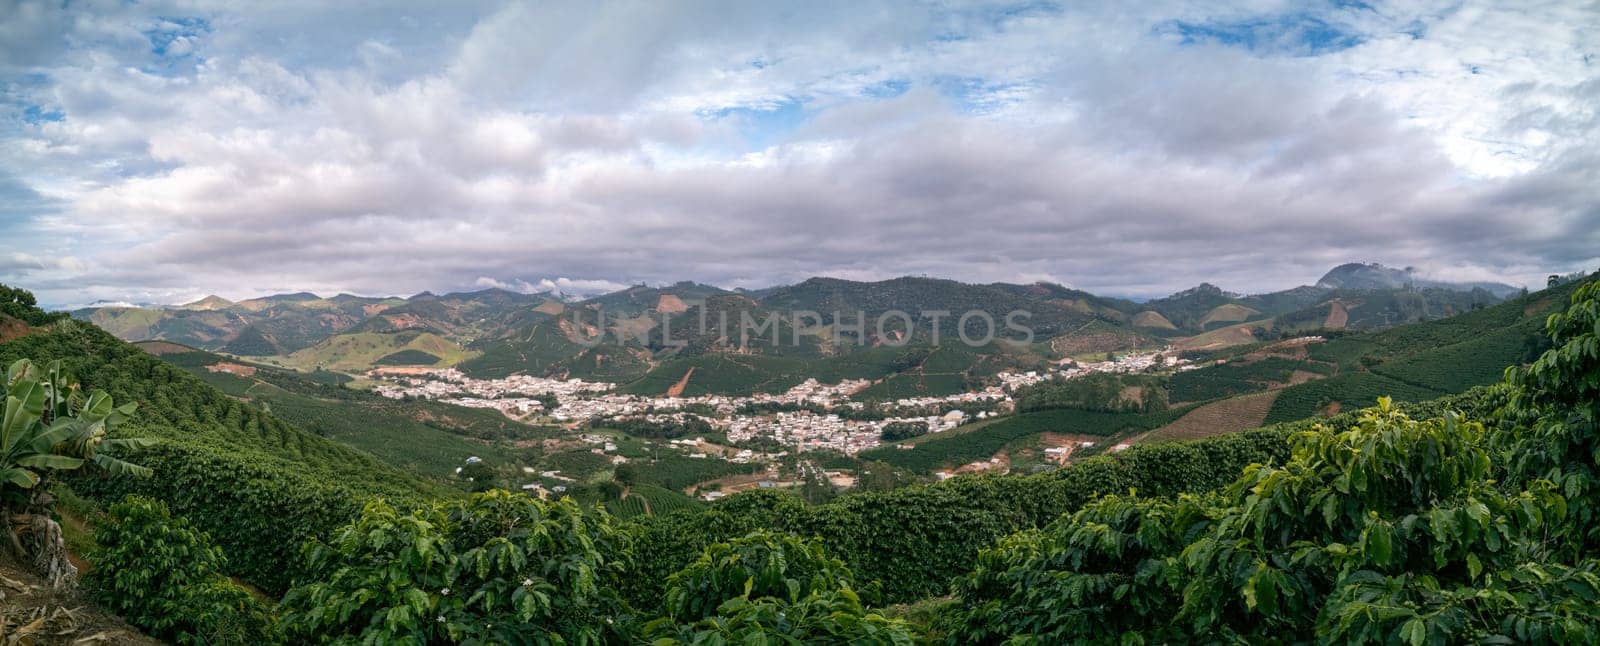 Stunning nature scene of Alto Caparao coffee town nestled in valley and enveloped by green coffee fields under cloudy sky. Perfect for agricultural and rural themes and with space for text.